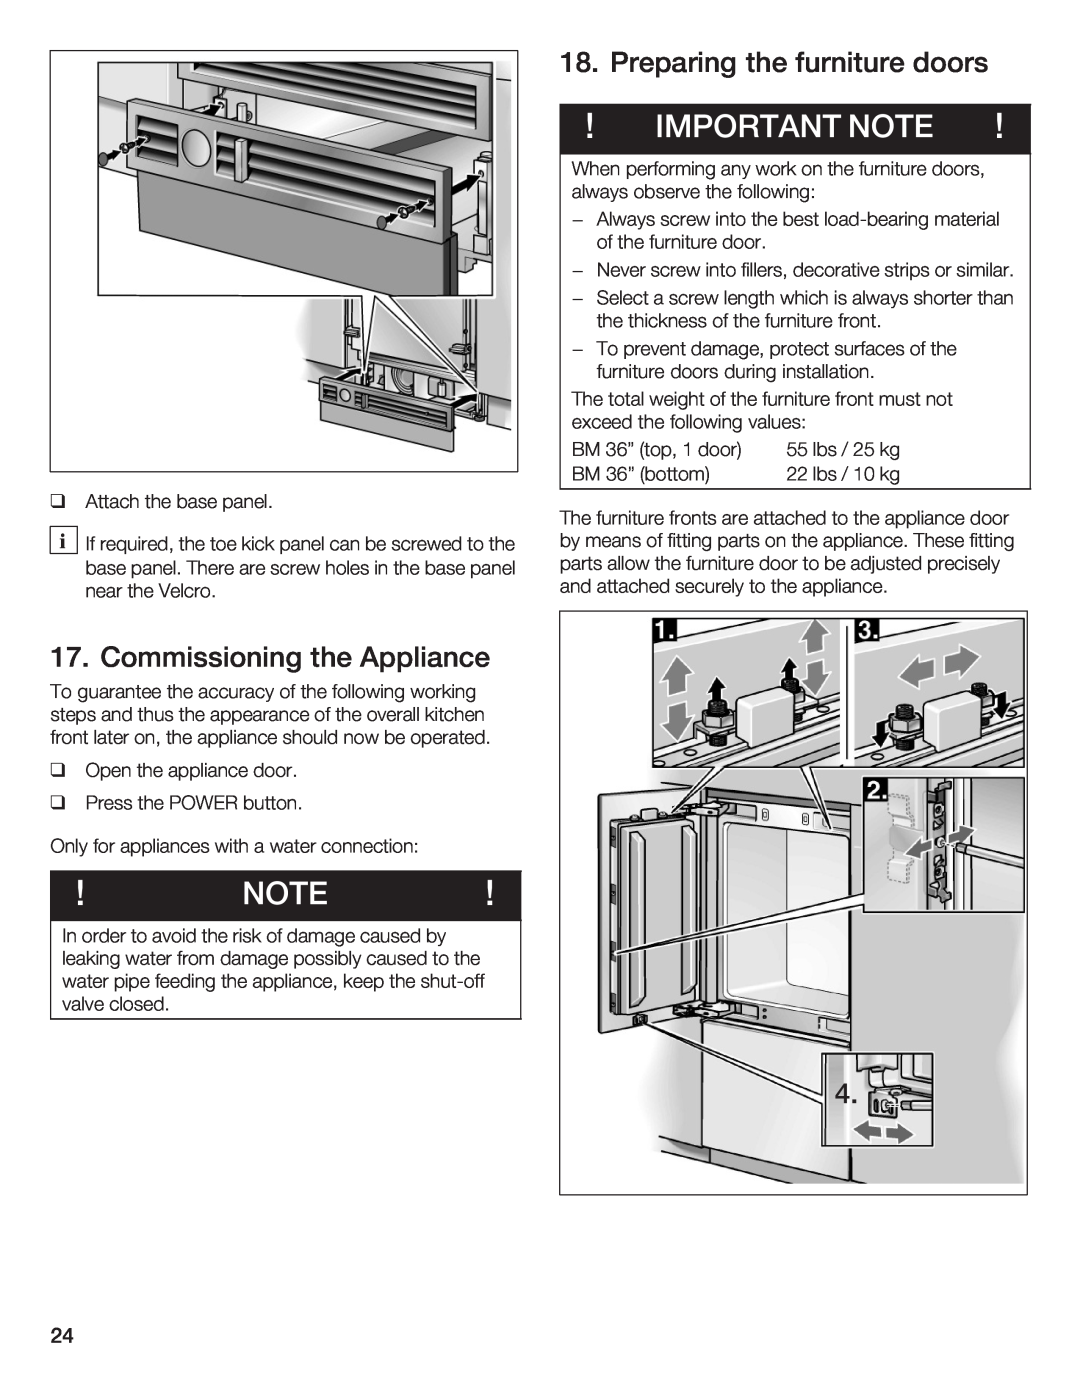 Thermador T36IB70NSP manual Important Note, Preparing the furniture doors, Commissioning the Appliance 